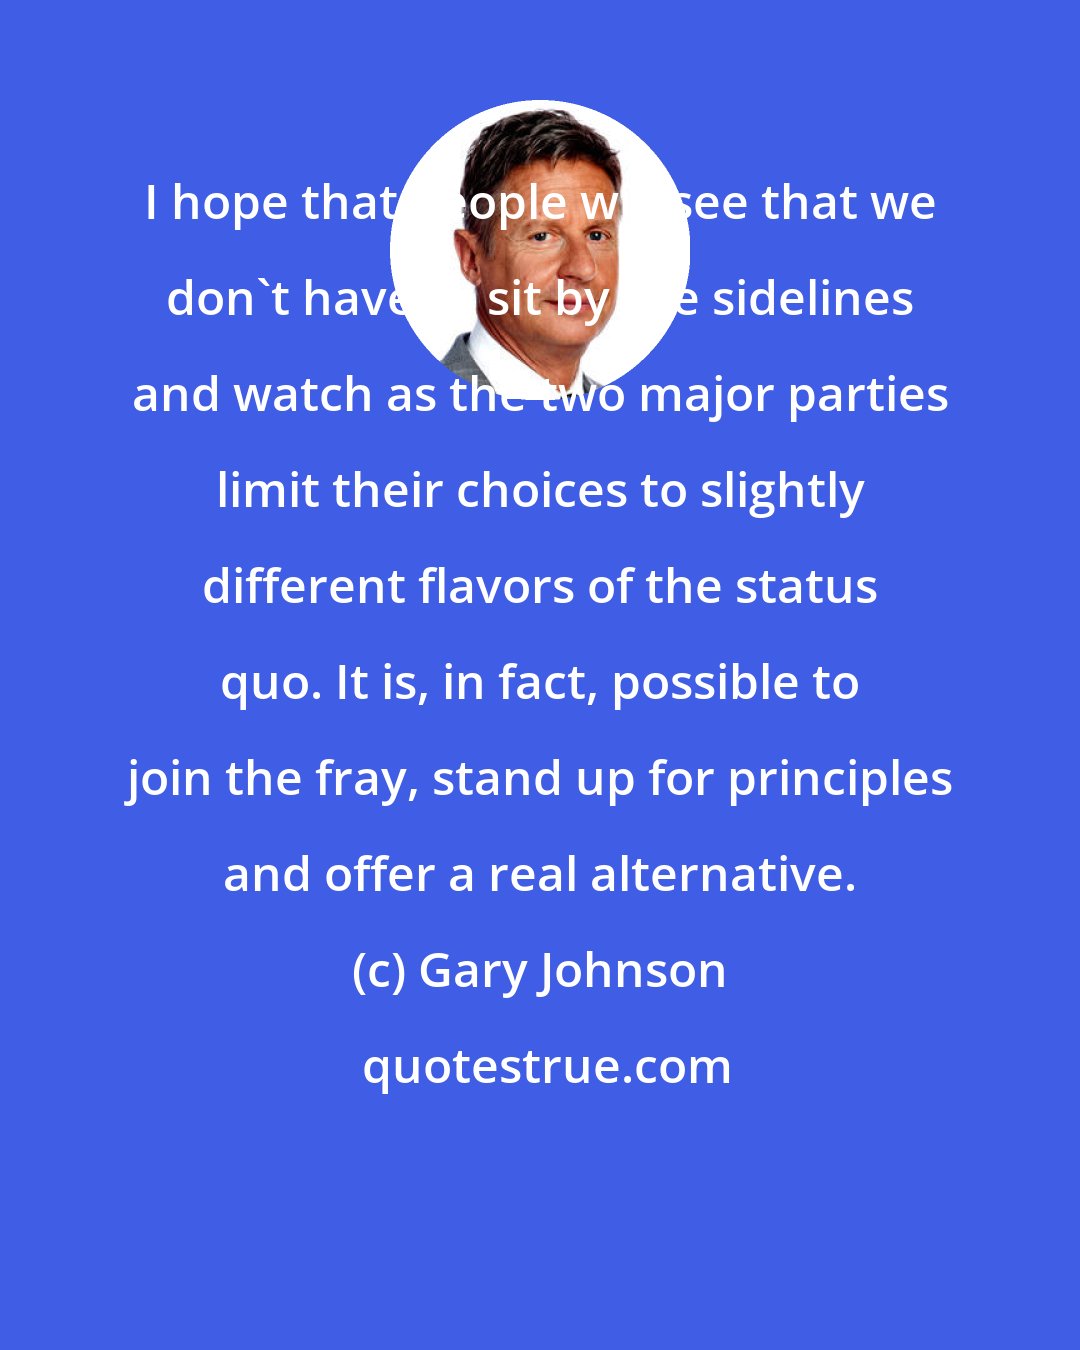 Gary Johnson: I hope that people will see that we don't have to sit by the sidelines and watch as the two major parties limit their choices to slightly different flavors of the status quo. It is, in fact, possible to join the fray, stand up for principles and offer a real alternative.